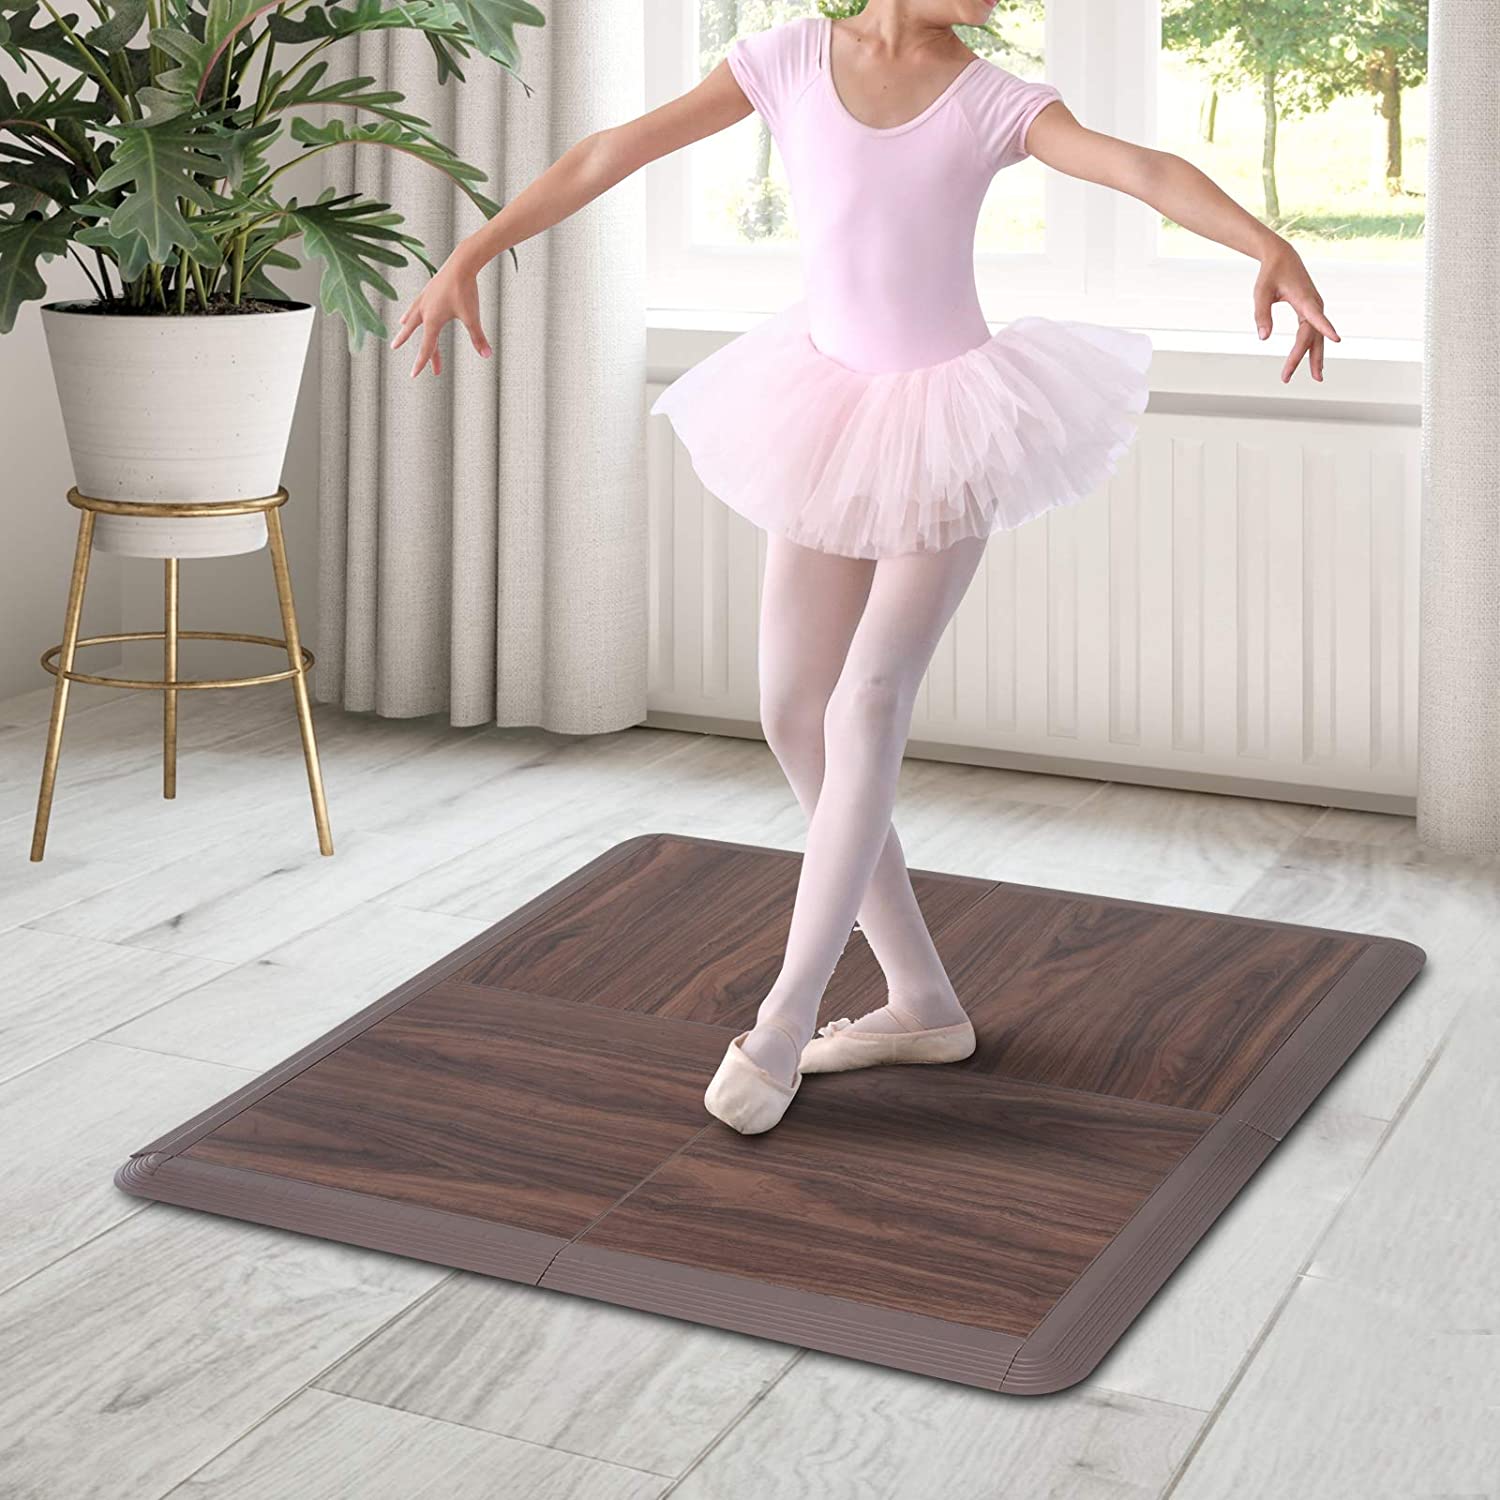 Artan Balance Dance Floor for Home, Studio, Stage Performance, or Outdoor  Party, Smooth Flooring for Ballet, Jazz, or Tap Practice, Reversible Roll